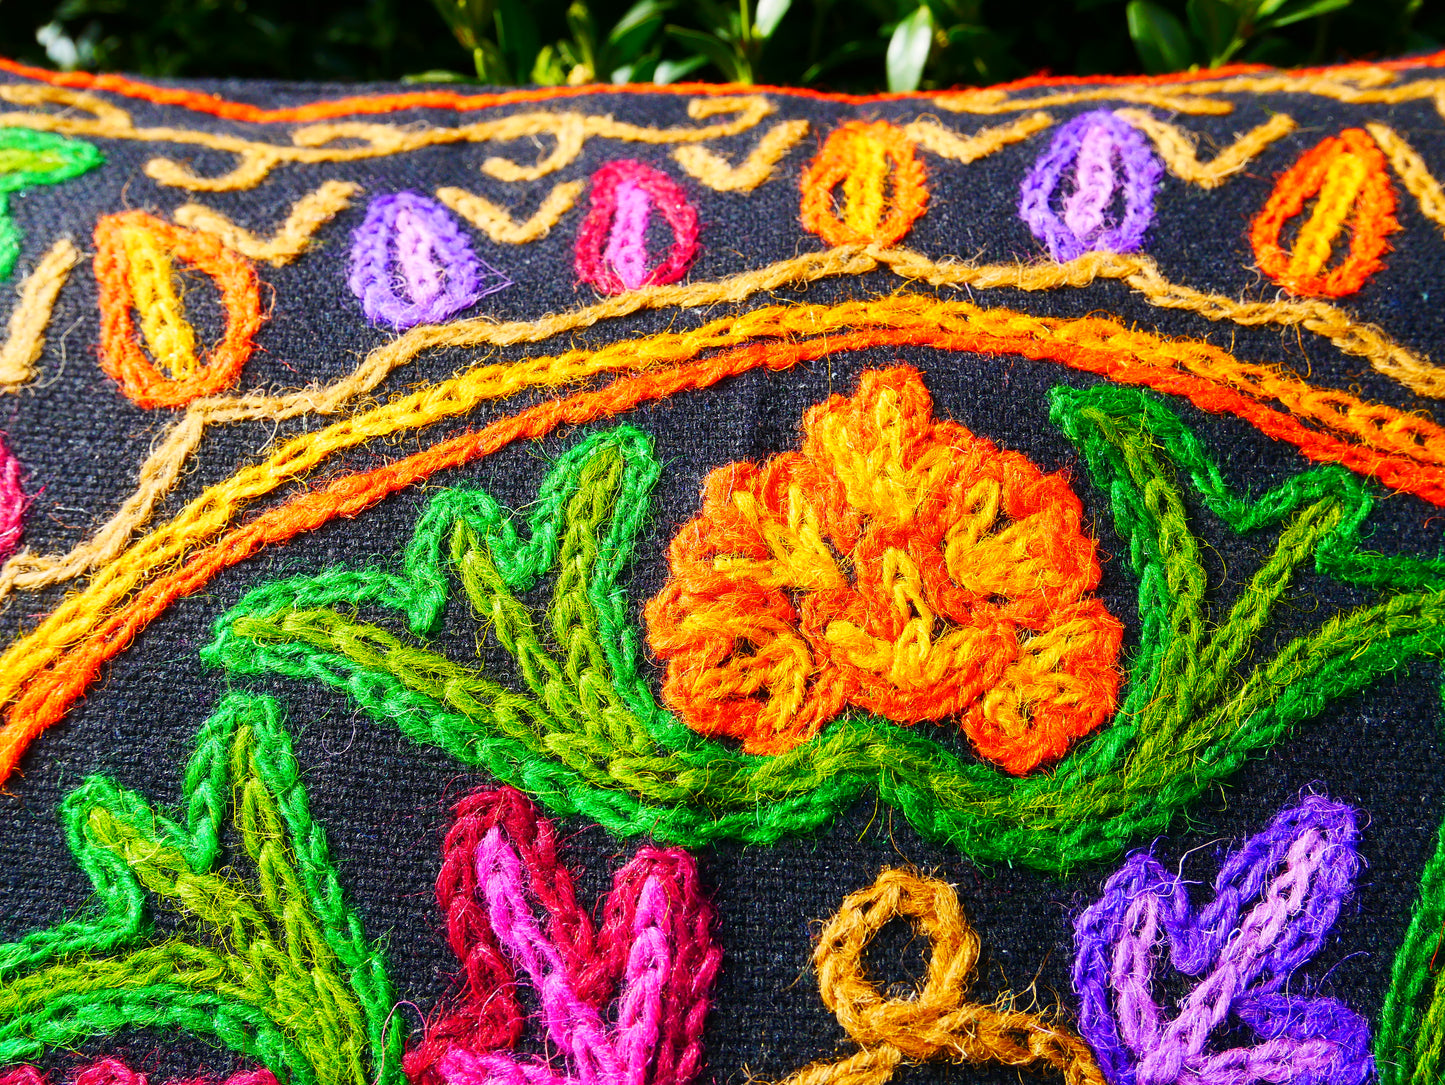 Set of 2 Kashmiri Crewel Pillow Covers: Hand embroidered unique Duo for Your Cozy Retreat